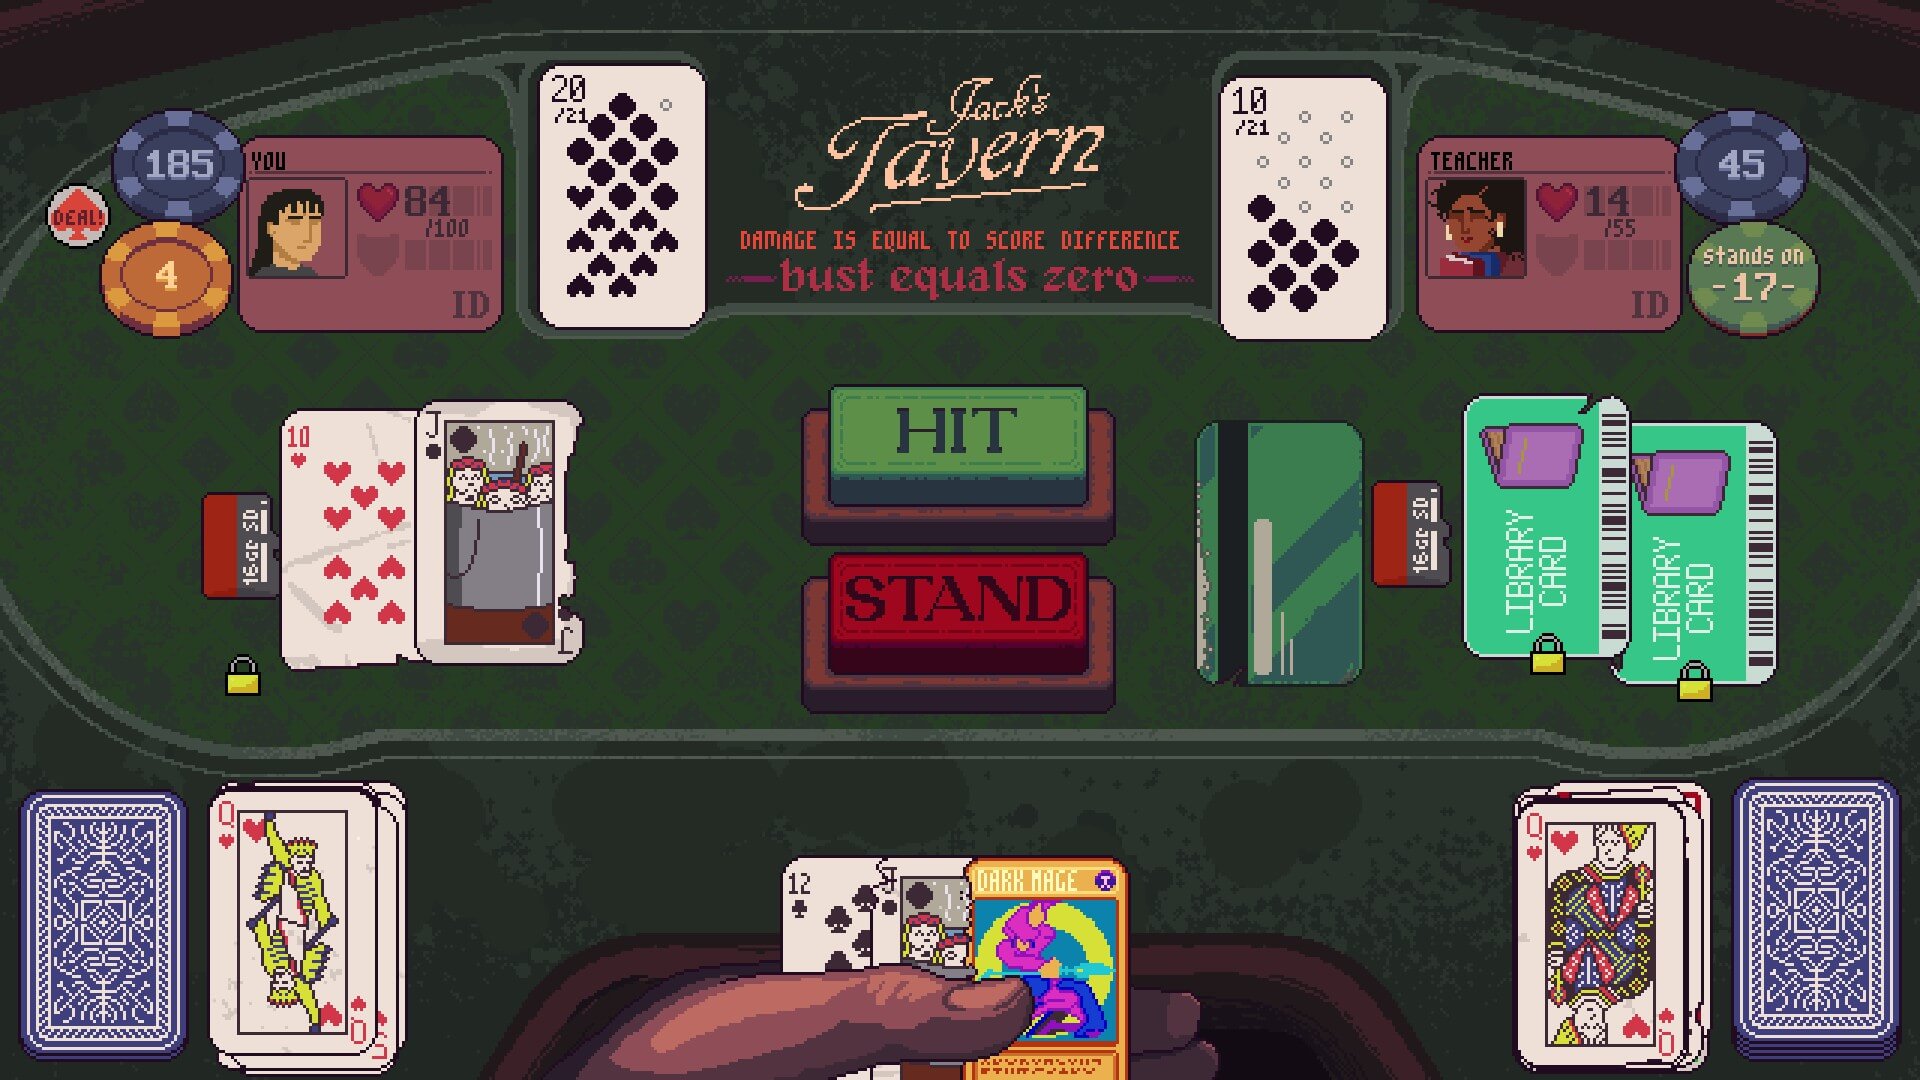 A pixelated hand holds a variety of odd cards ranging from normal playing cards to Yu-Gi-Oh style trading cards. There is an opponent opposite, and most of the felt table is taken up by poker chips, more cards, and all the accompanying gear you need to play blackjack.